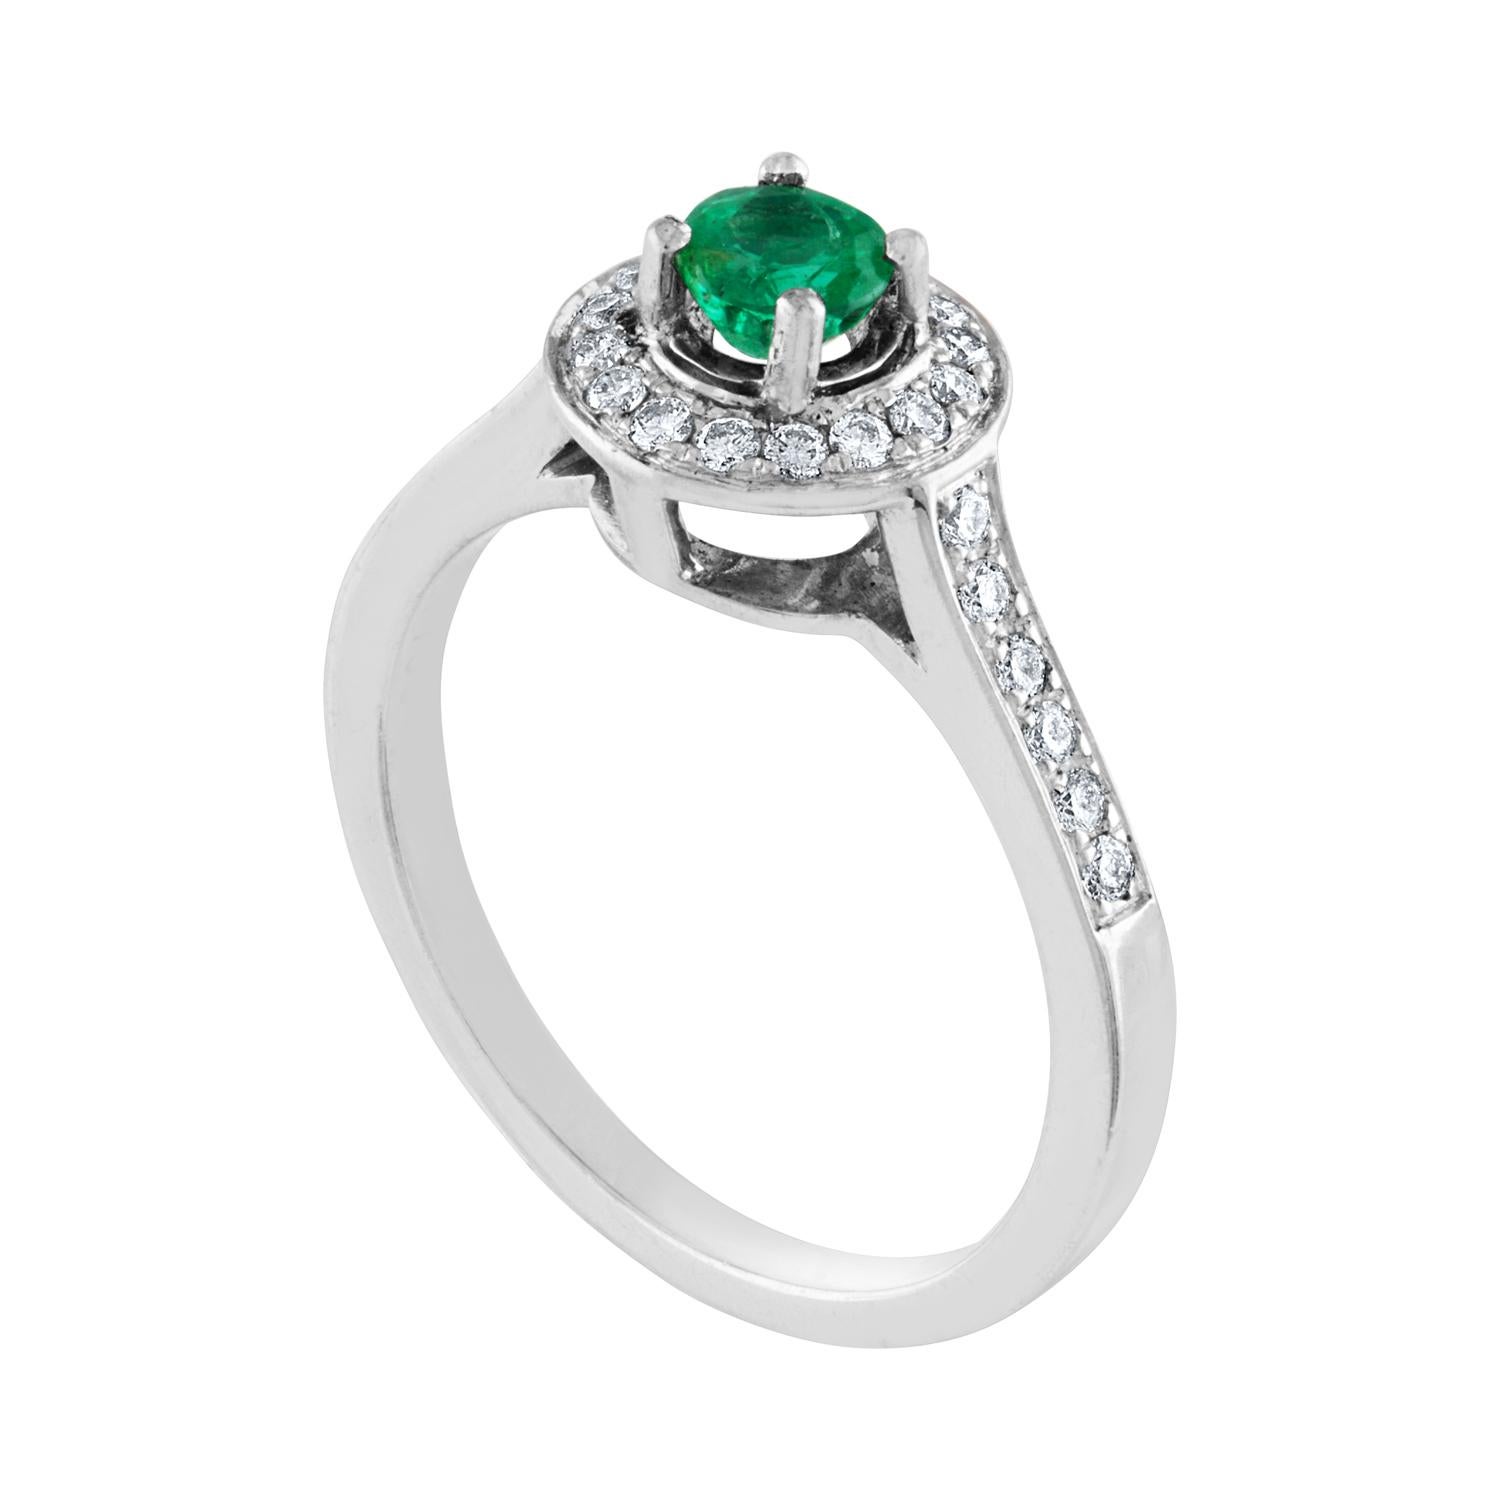 Stunningly Simple Emerald Ring
The ring is 18K White Gold.
The Emerald is a round 0.30 Carat Natural Emerald
There are 0.25 Carats in Diamonds F/G VS/SI
The ring is a size 6.5, sizable.
The ring weighs 3.7 grams